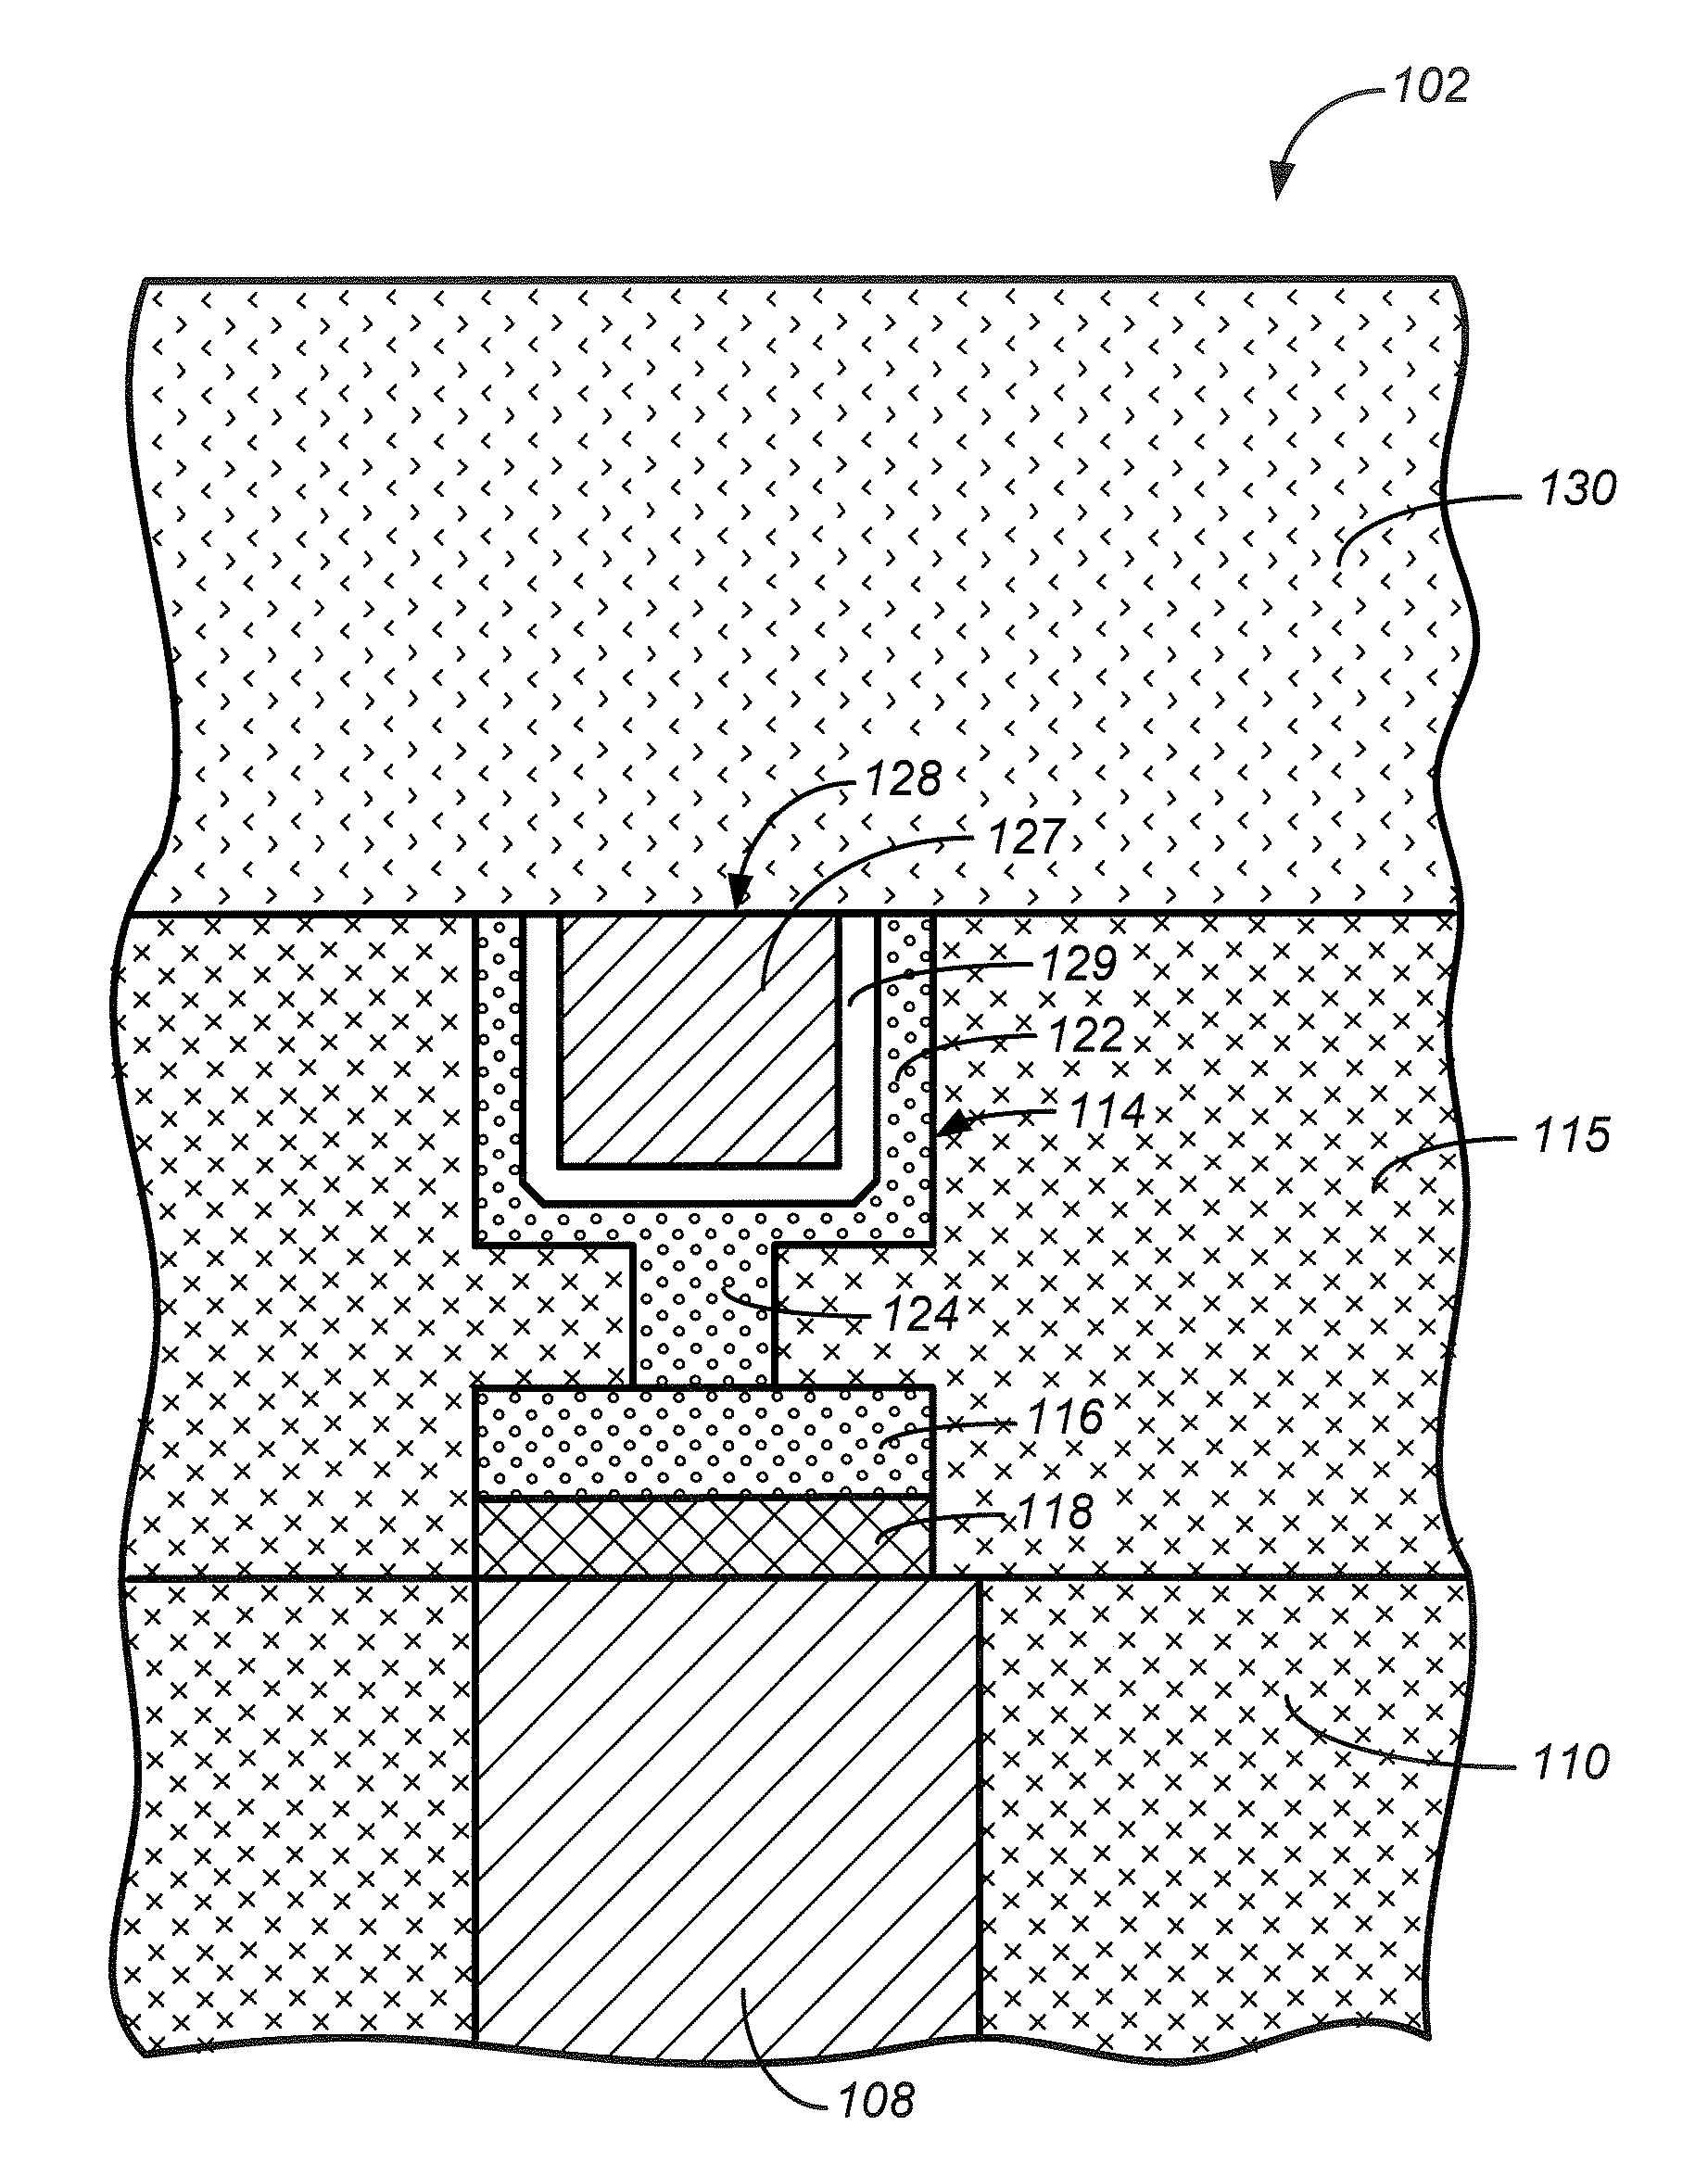 Memory structure with reduced-size memory element between memory material portions